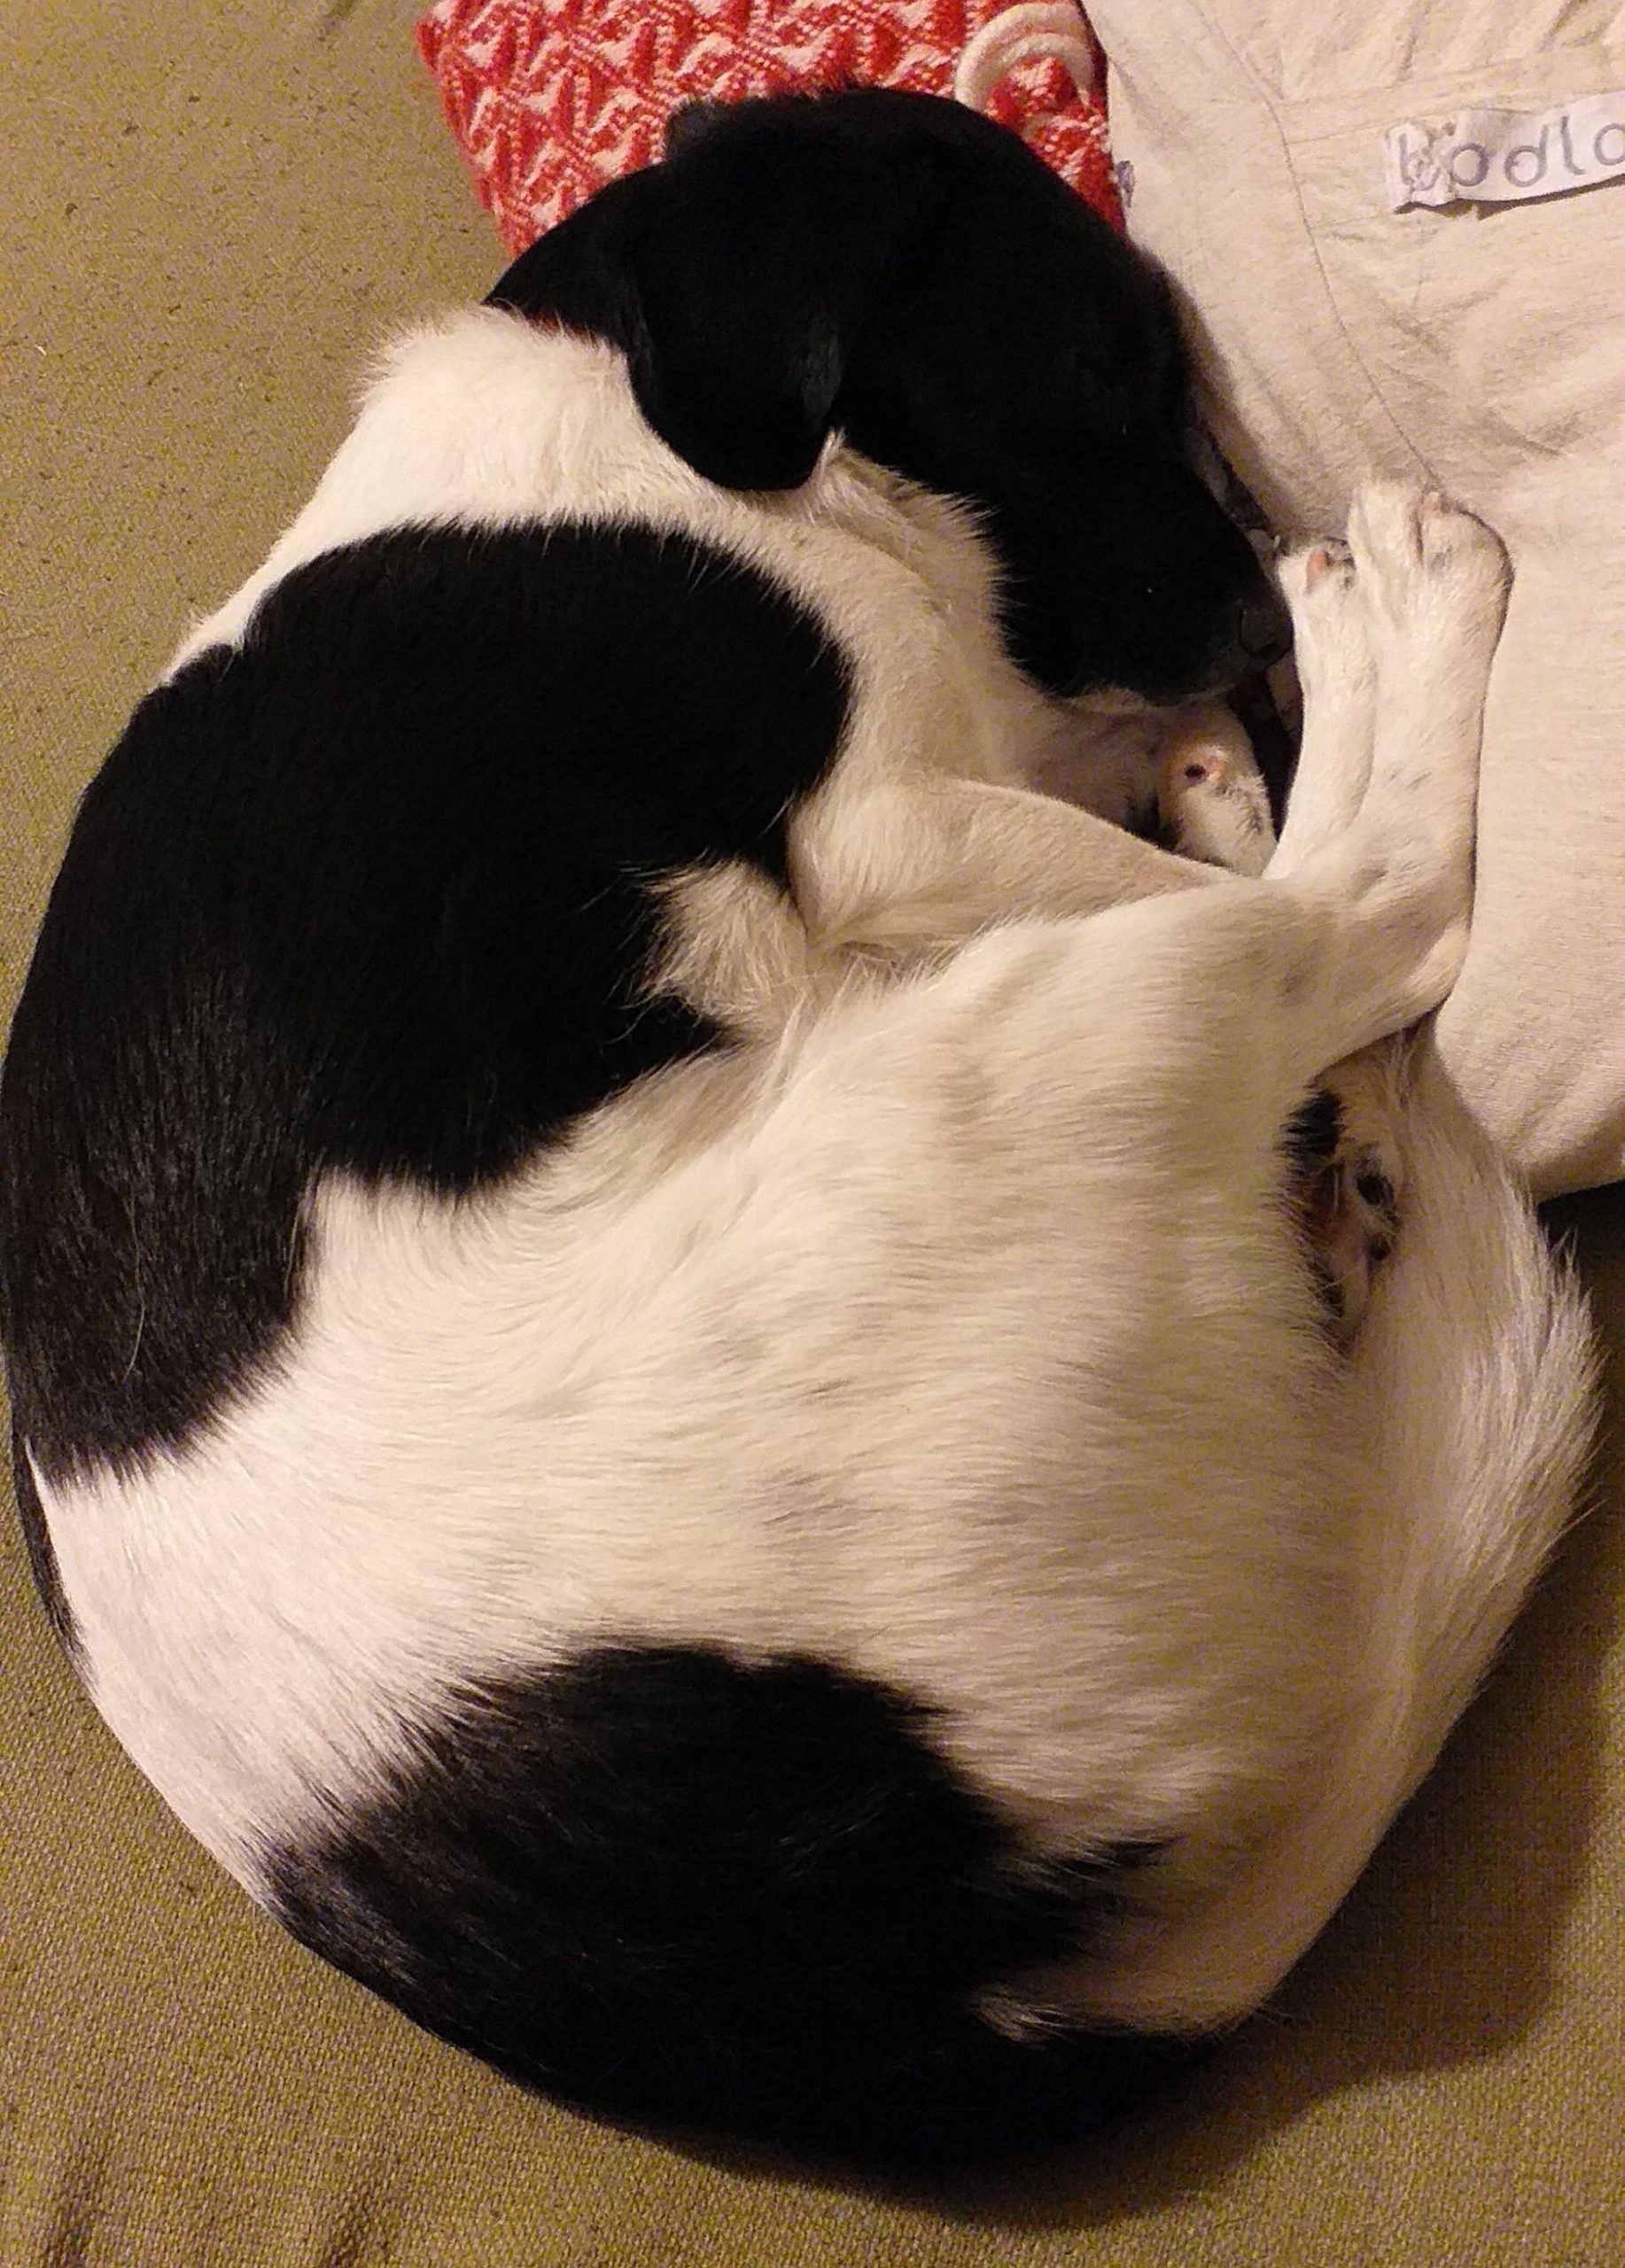 Small black and white dog curled up asleep on a pale green sofa. Her nose is tucked into her paws. She's very cute.